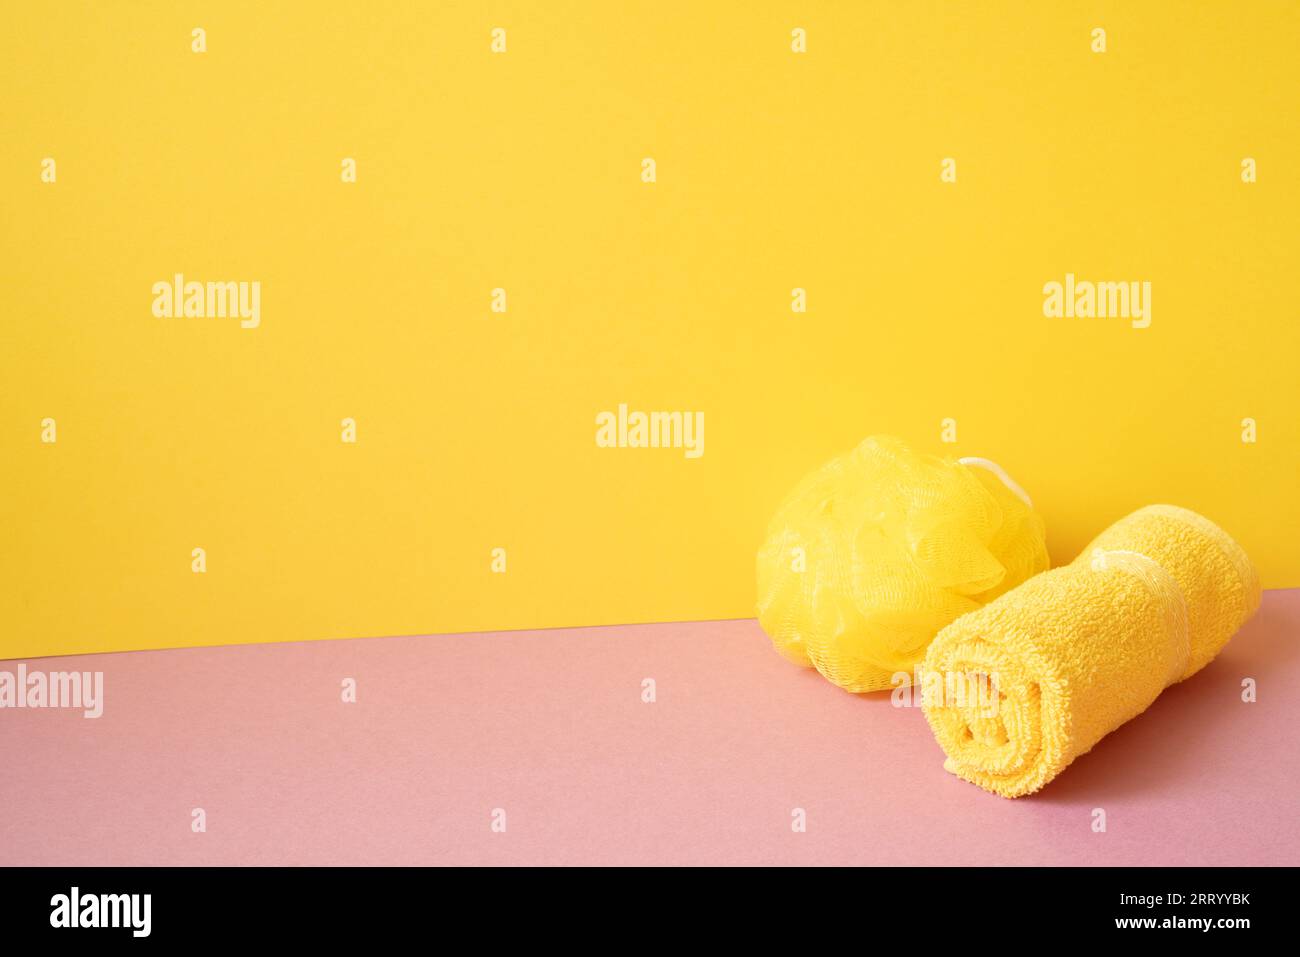 Bathroom shower ball and towel on pink table. yellow background. copy space Stock Photo